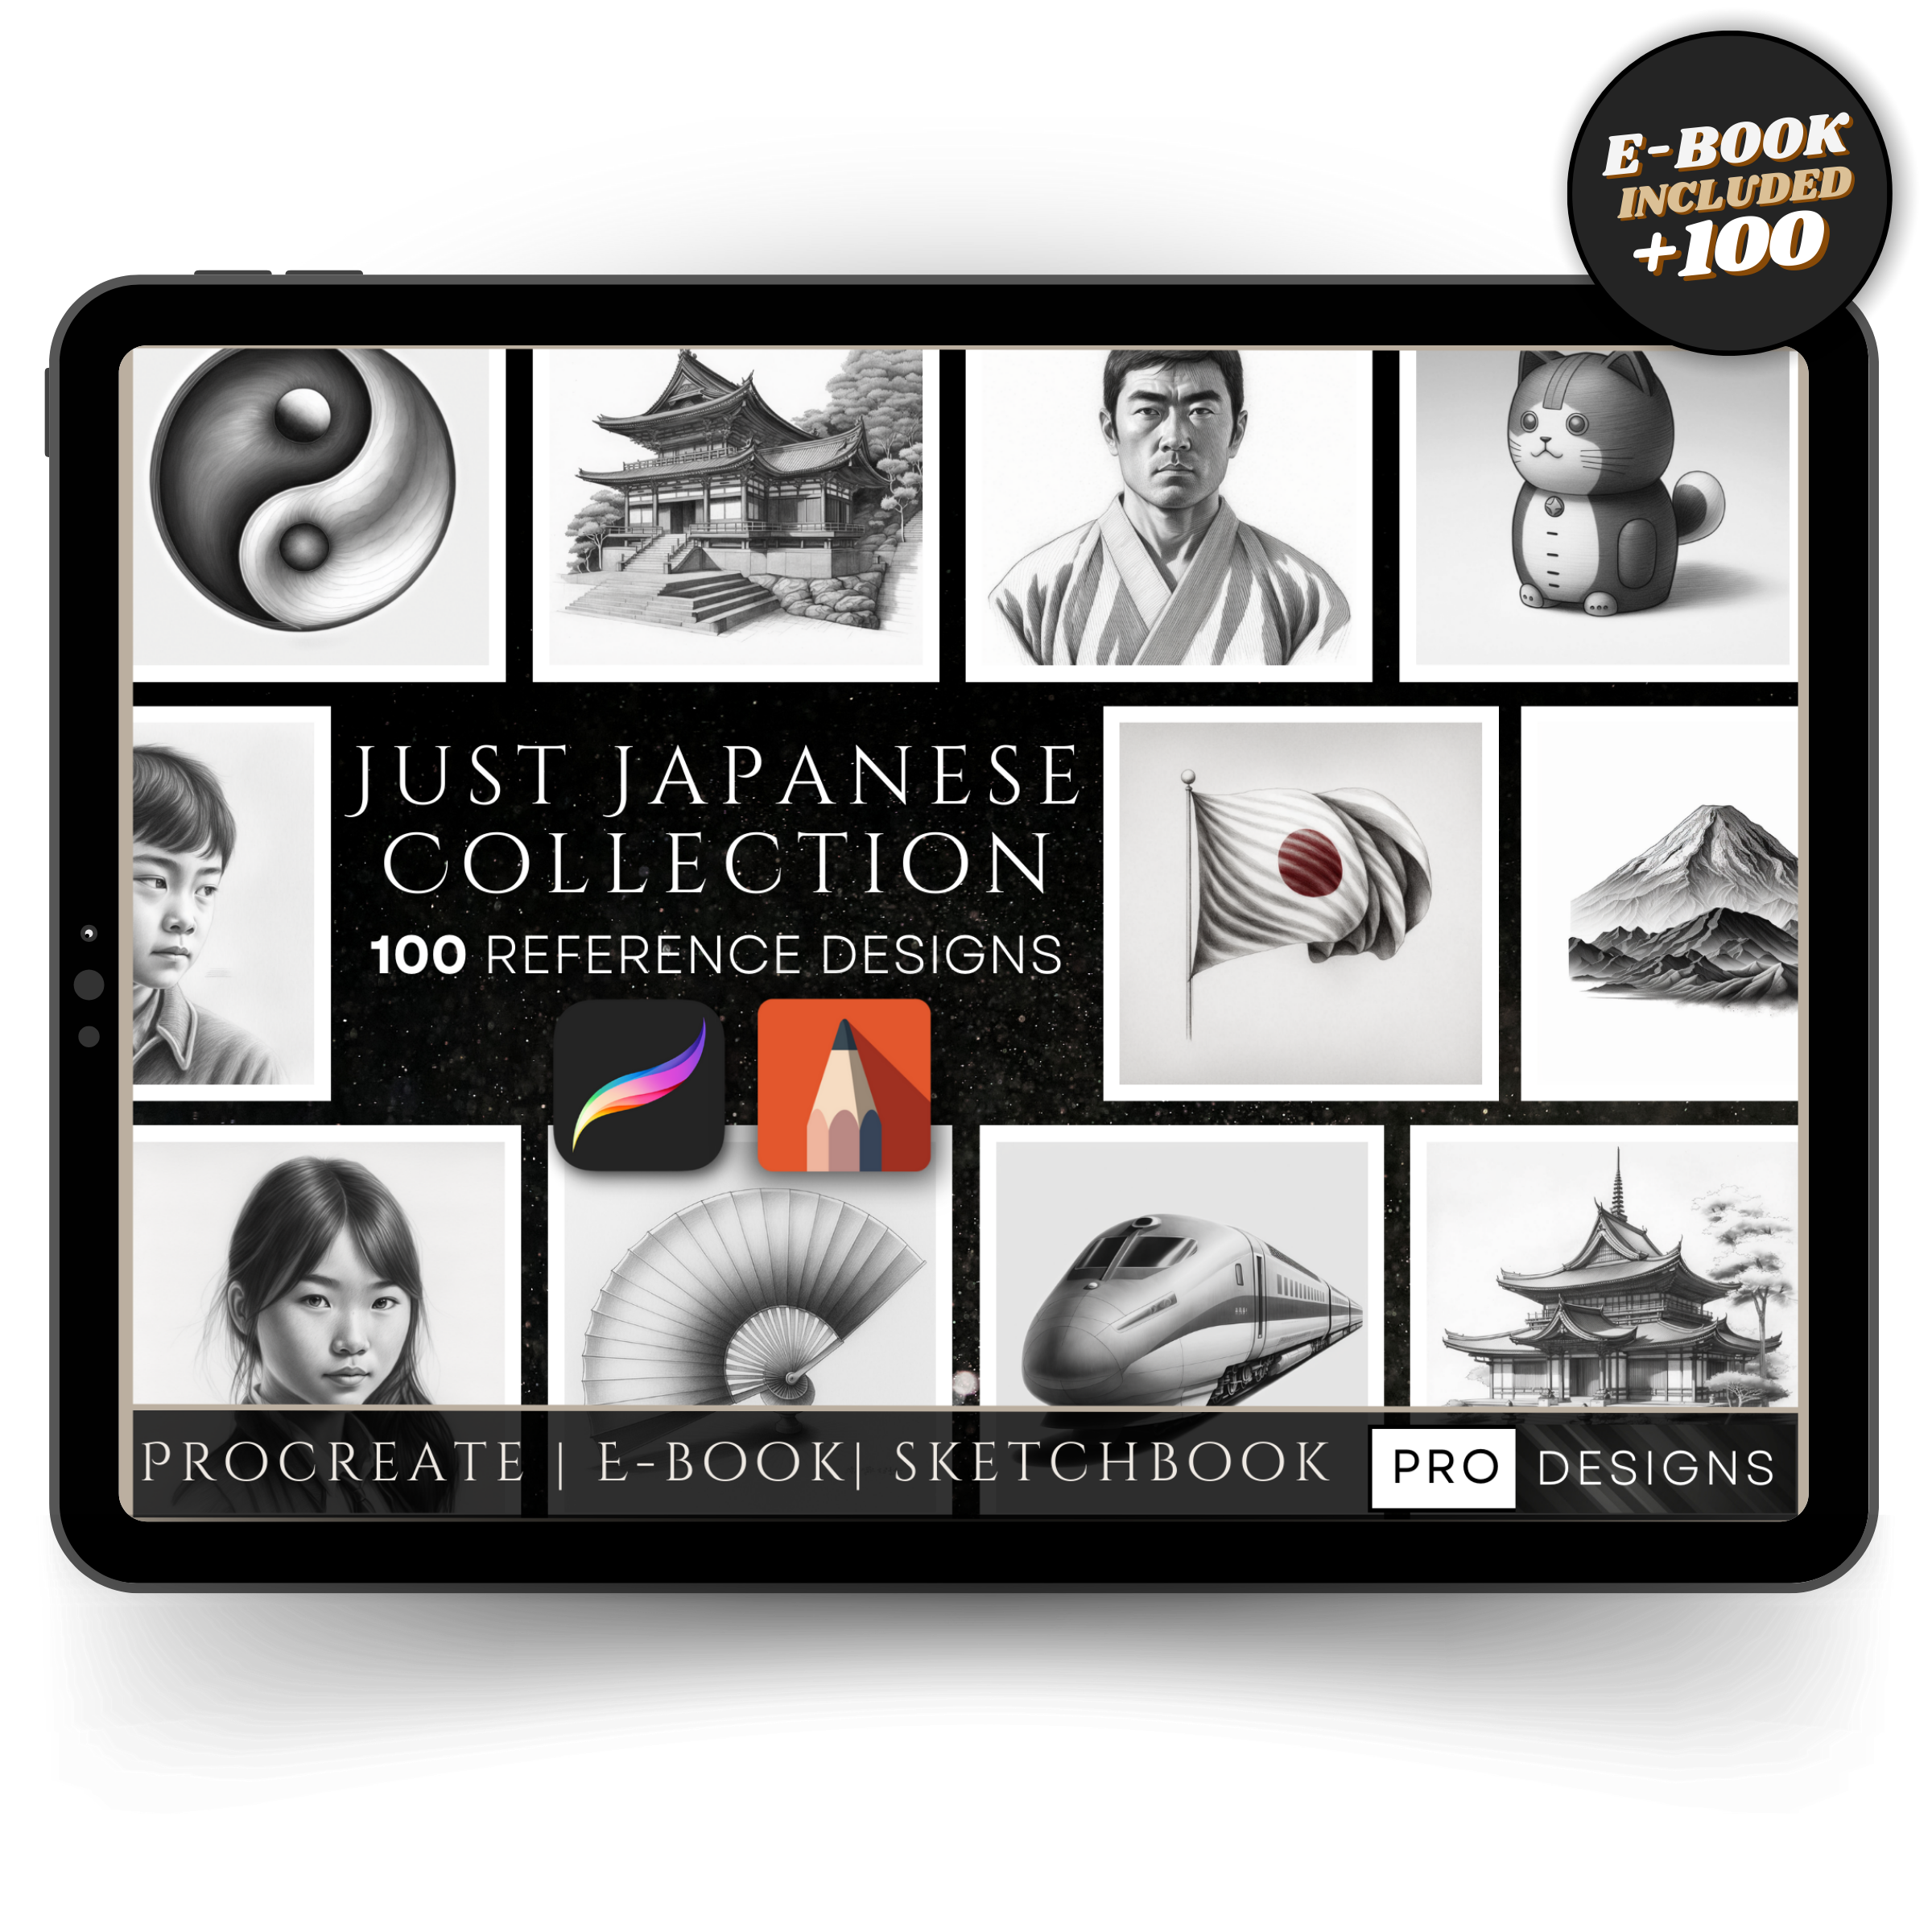 "Nippon Elegance" - The Essence of Japanese Art and Culture